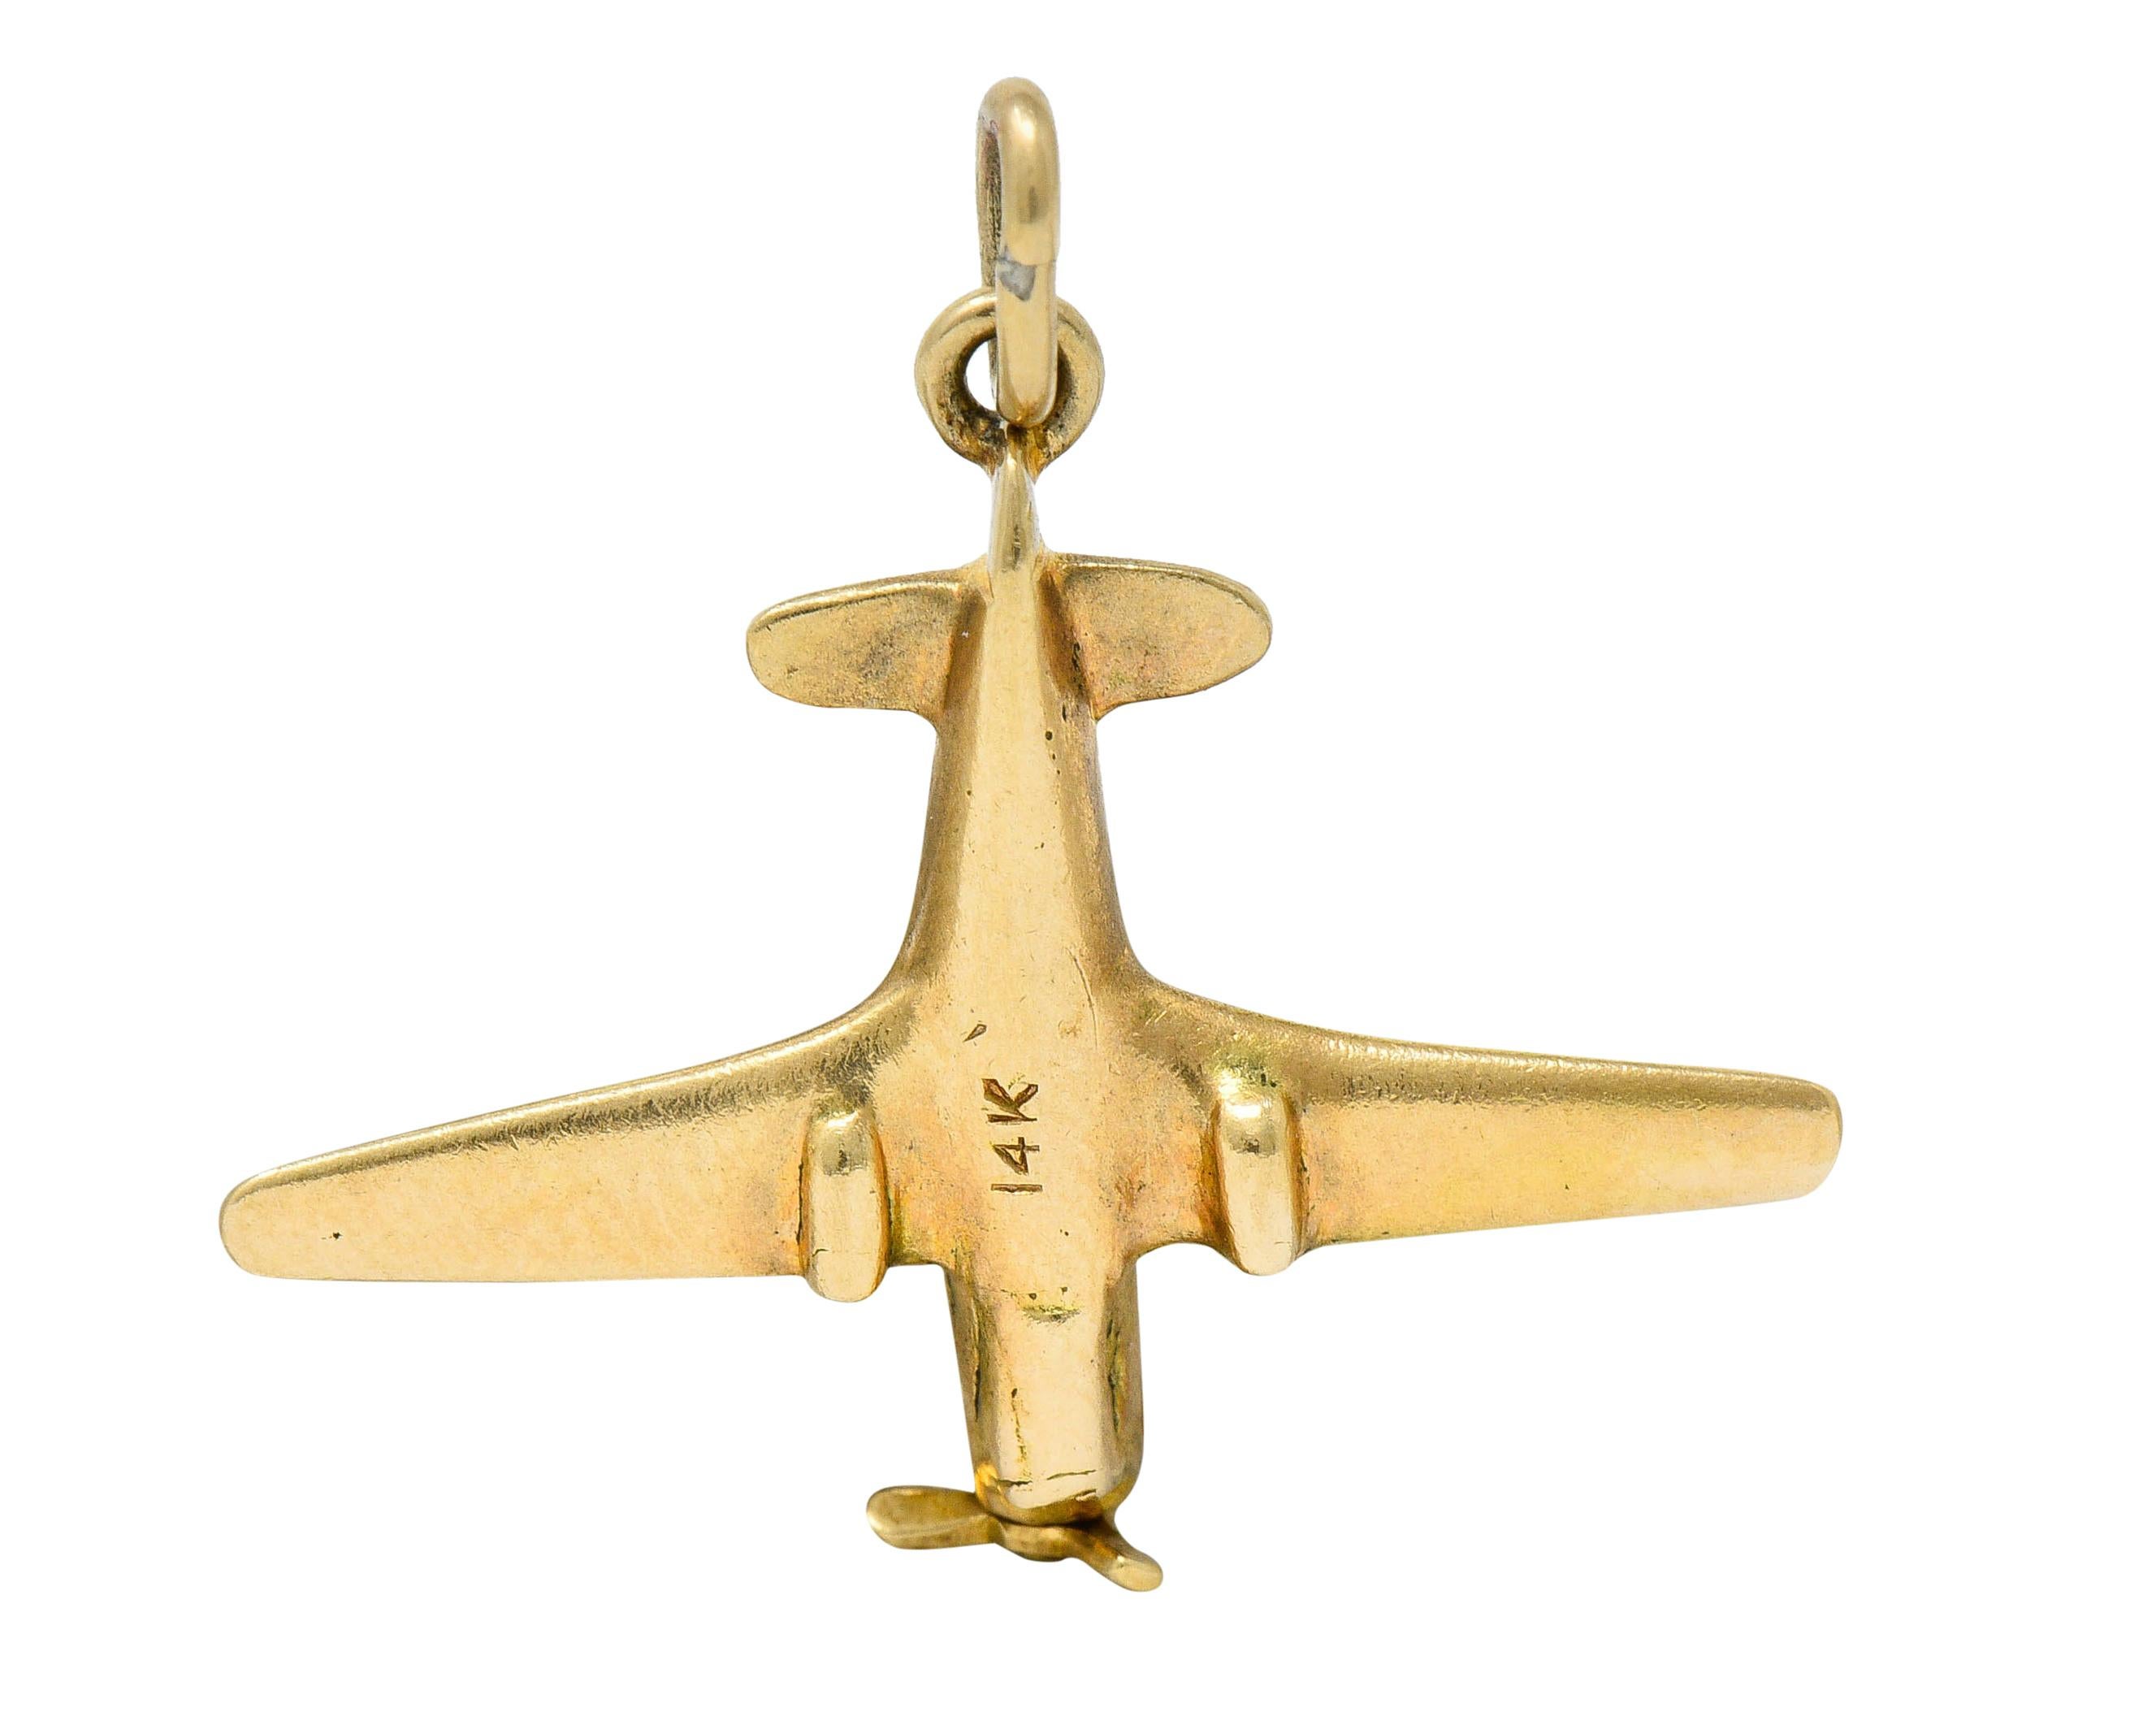 Designed as a stylized prop plane

With rotating propellers

Completed by a jump ring bale

Stamped 14K for 14 karat gold

Circa: 1940s

Measures: 1 x 7/8 inch (including bale)

Total weight: 2.9 grams

Bright. Aspiring. Aviation.
 

Stock Number: